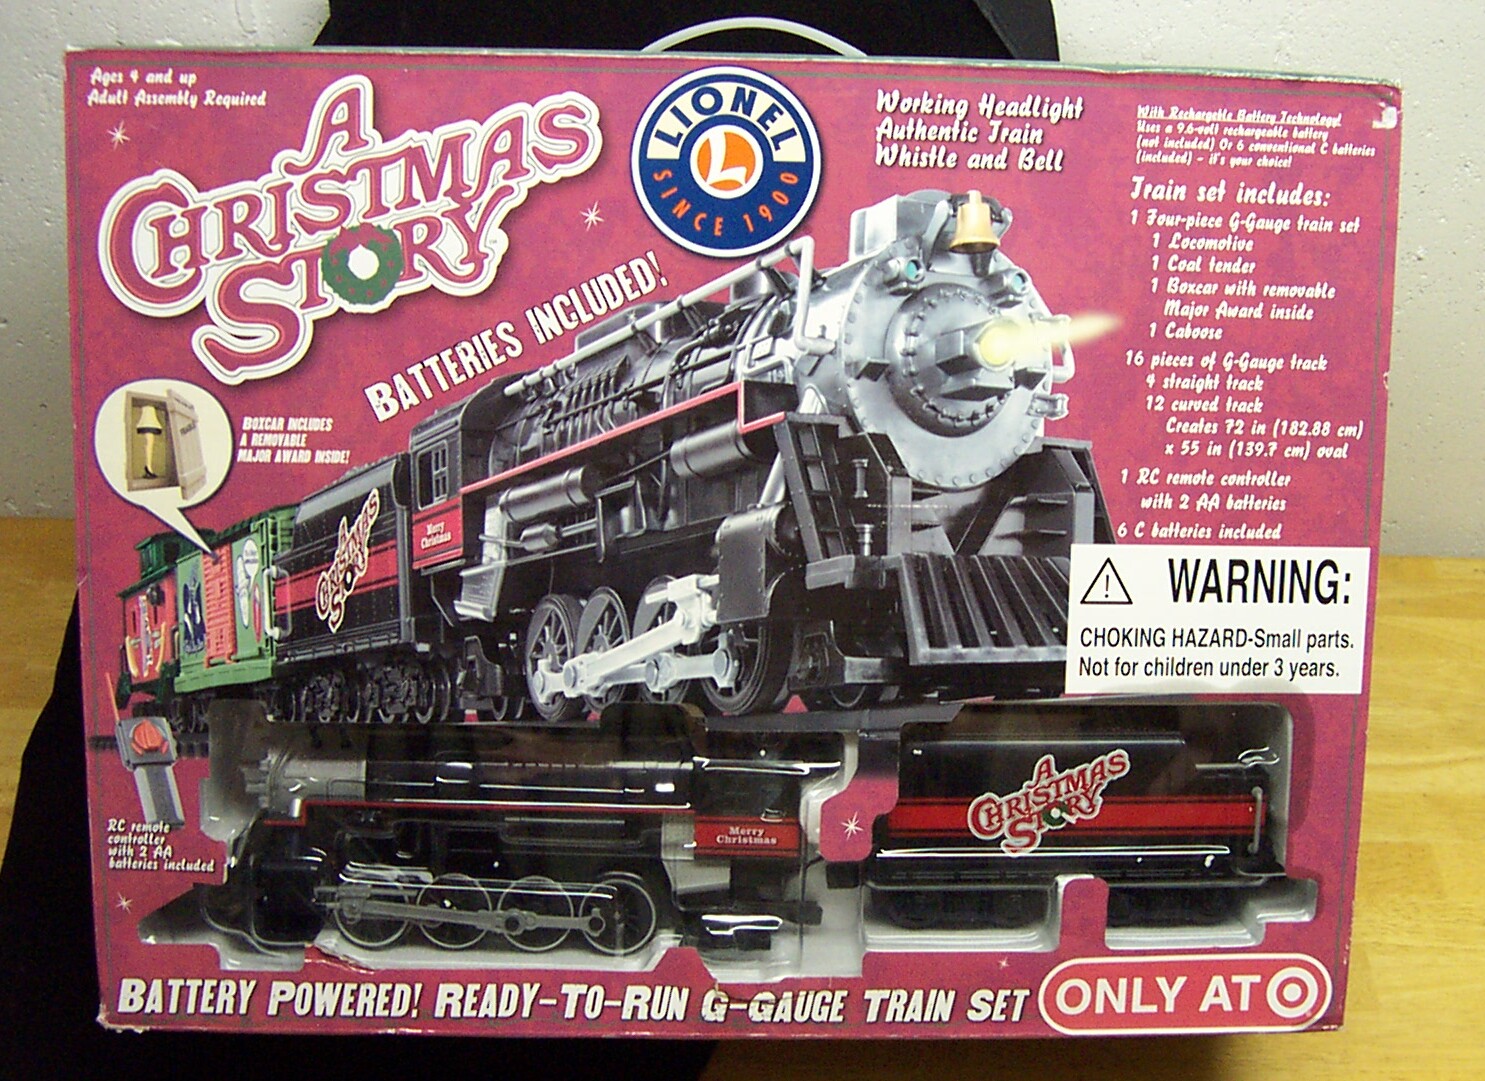 a Christmas Story Lionel Battery Powered G-gauge Train Set Target 2009 for sale online 